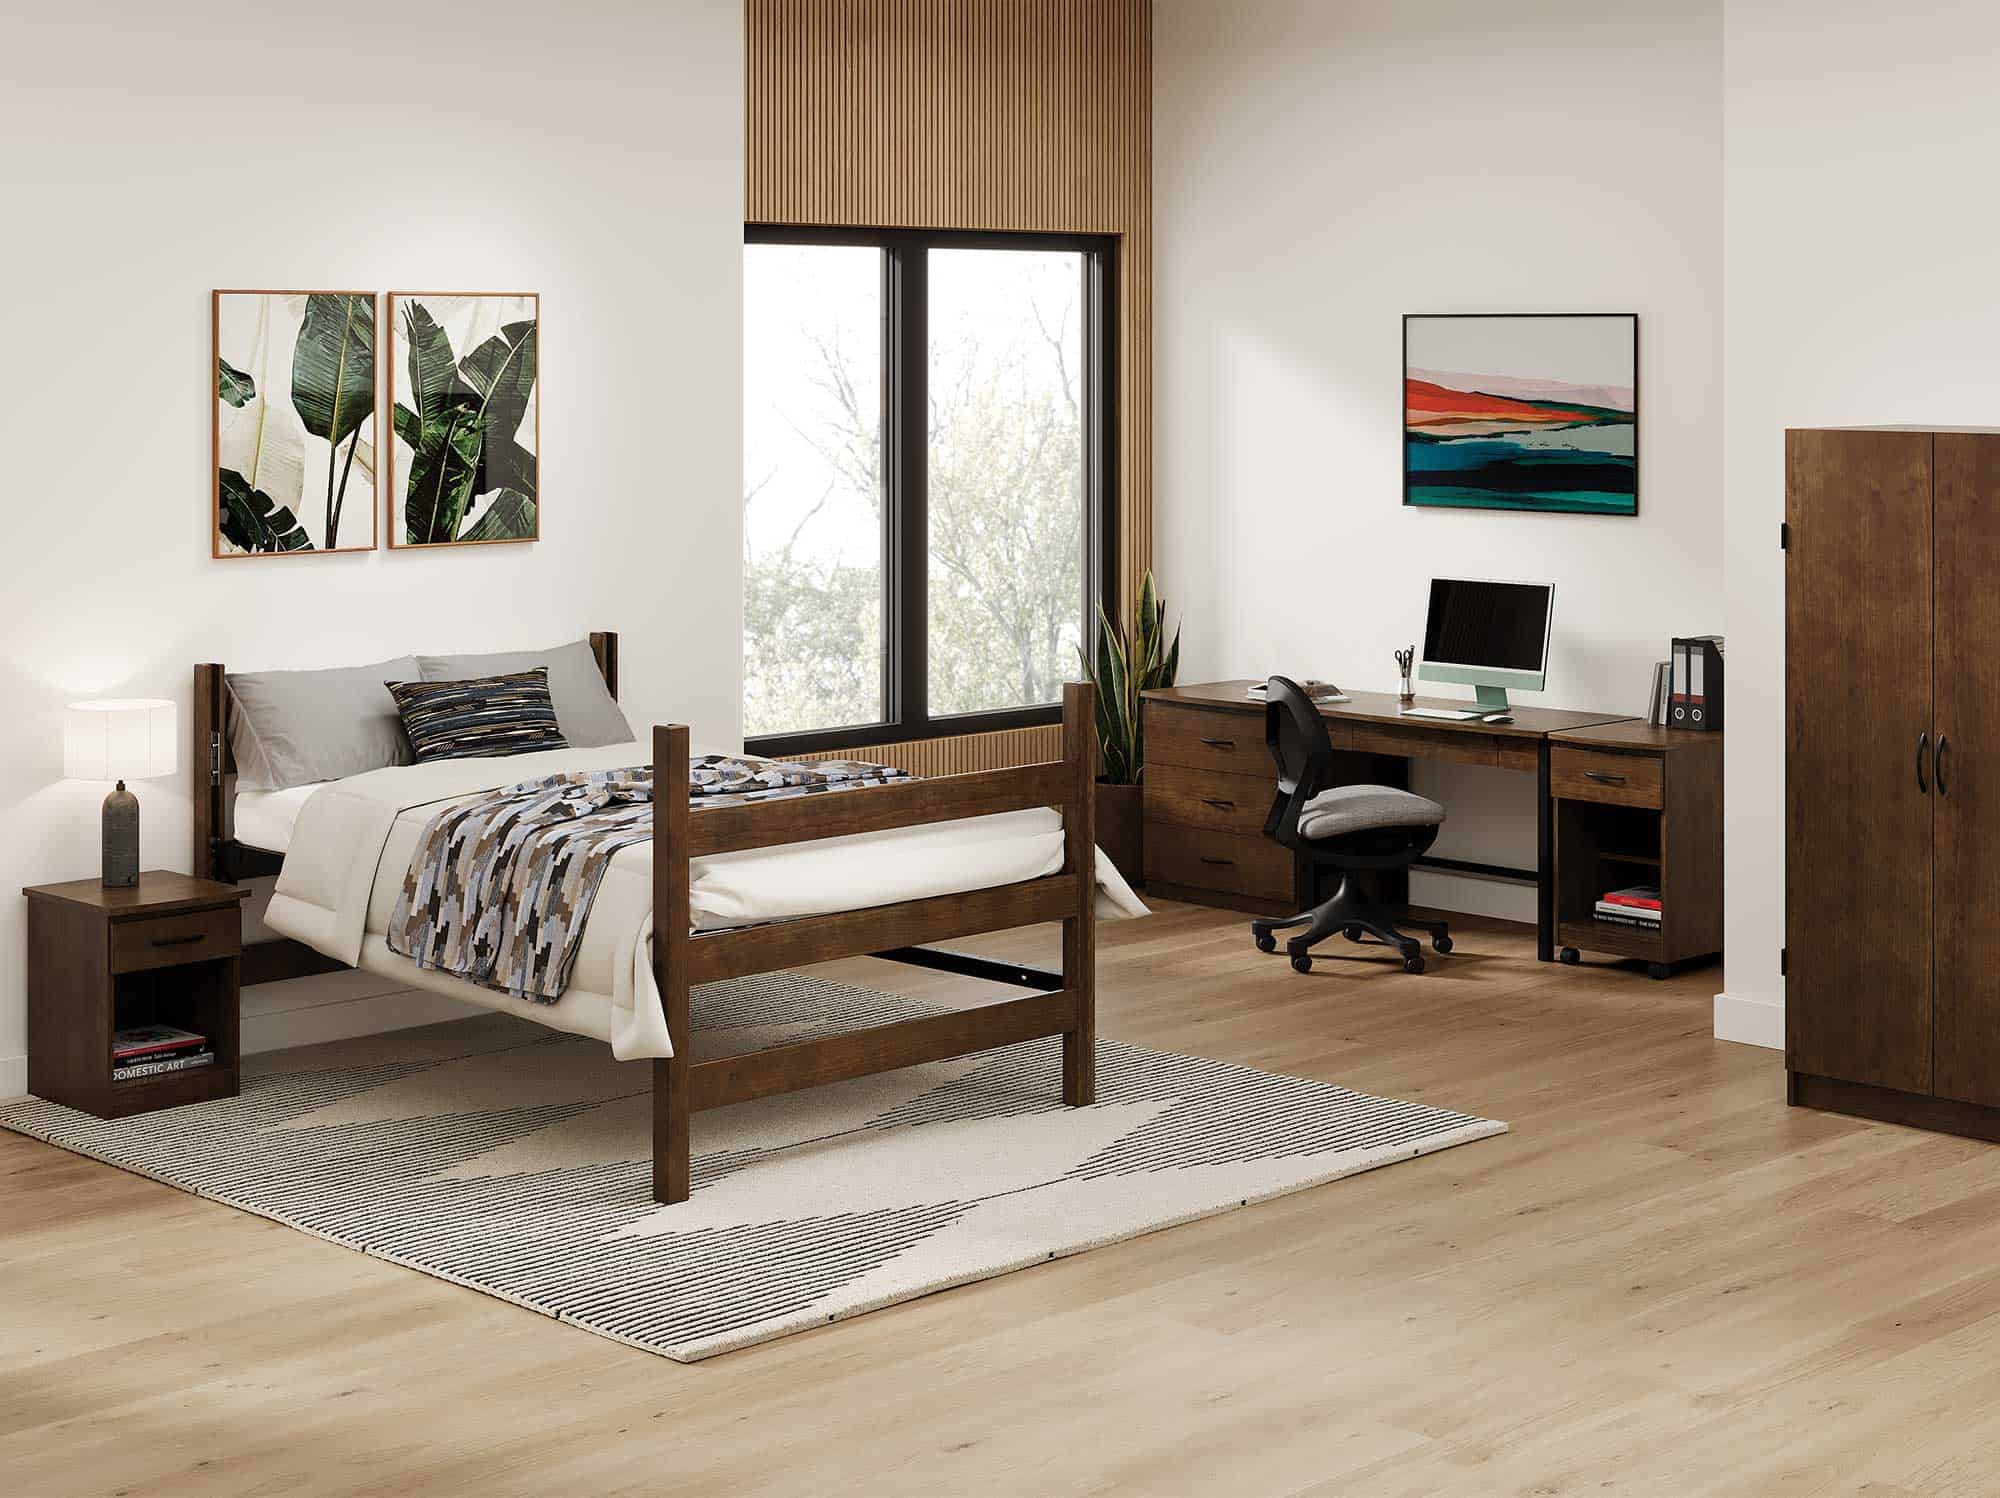 Student Room on Campus with zTrak Jr. Loft Full-Size Bed and Merit Nightstand, Desk, and Wardrobe in Walnut Finish.